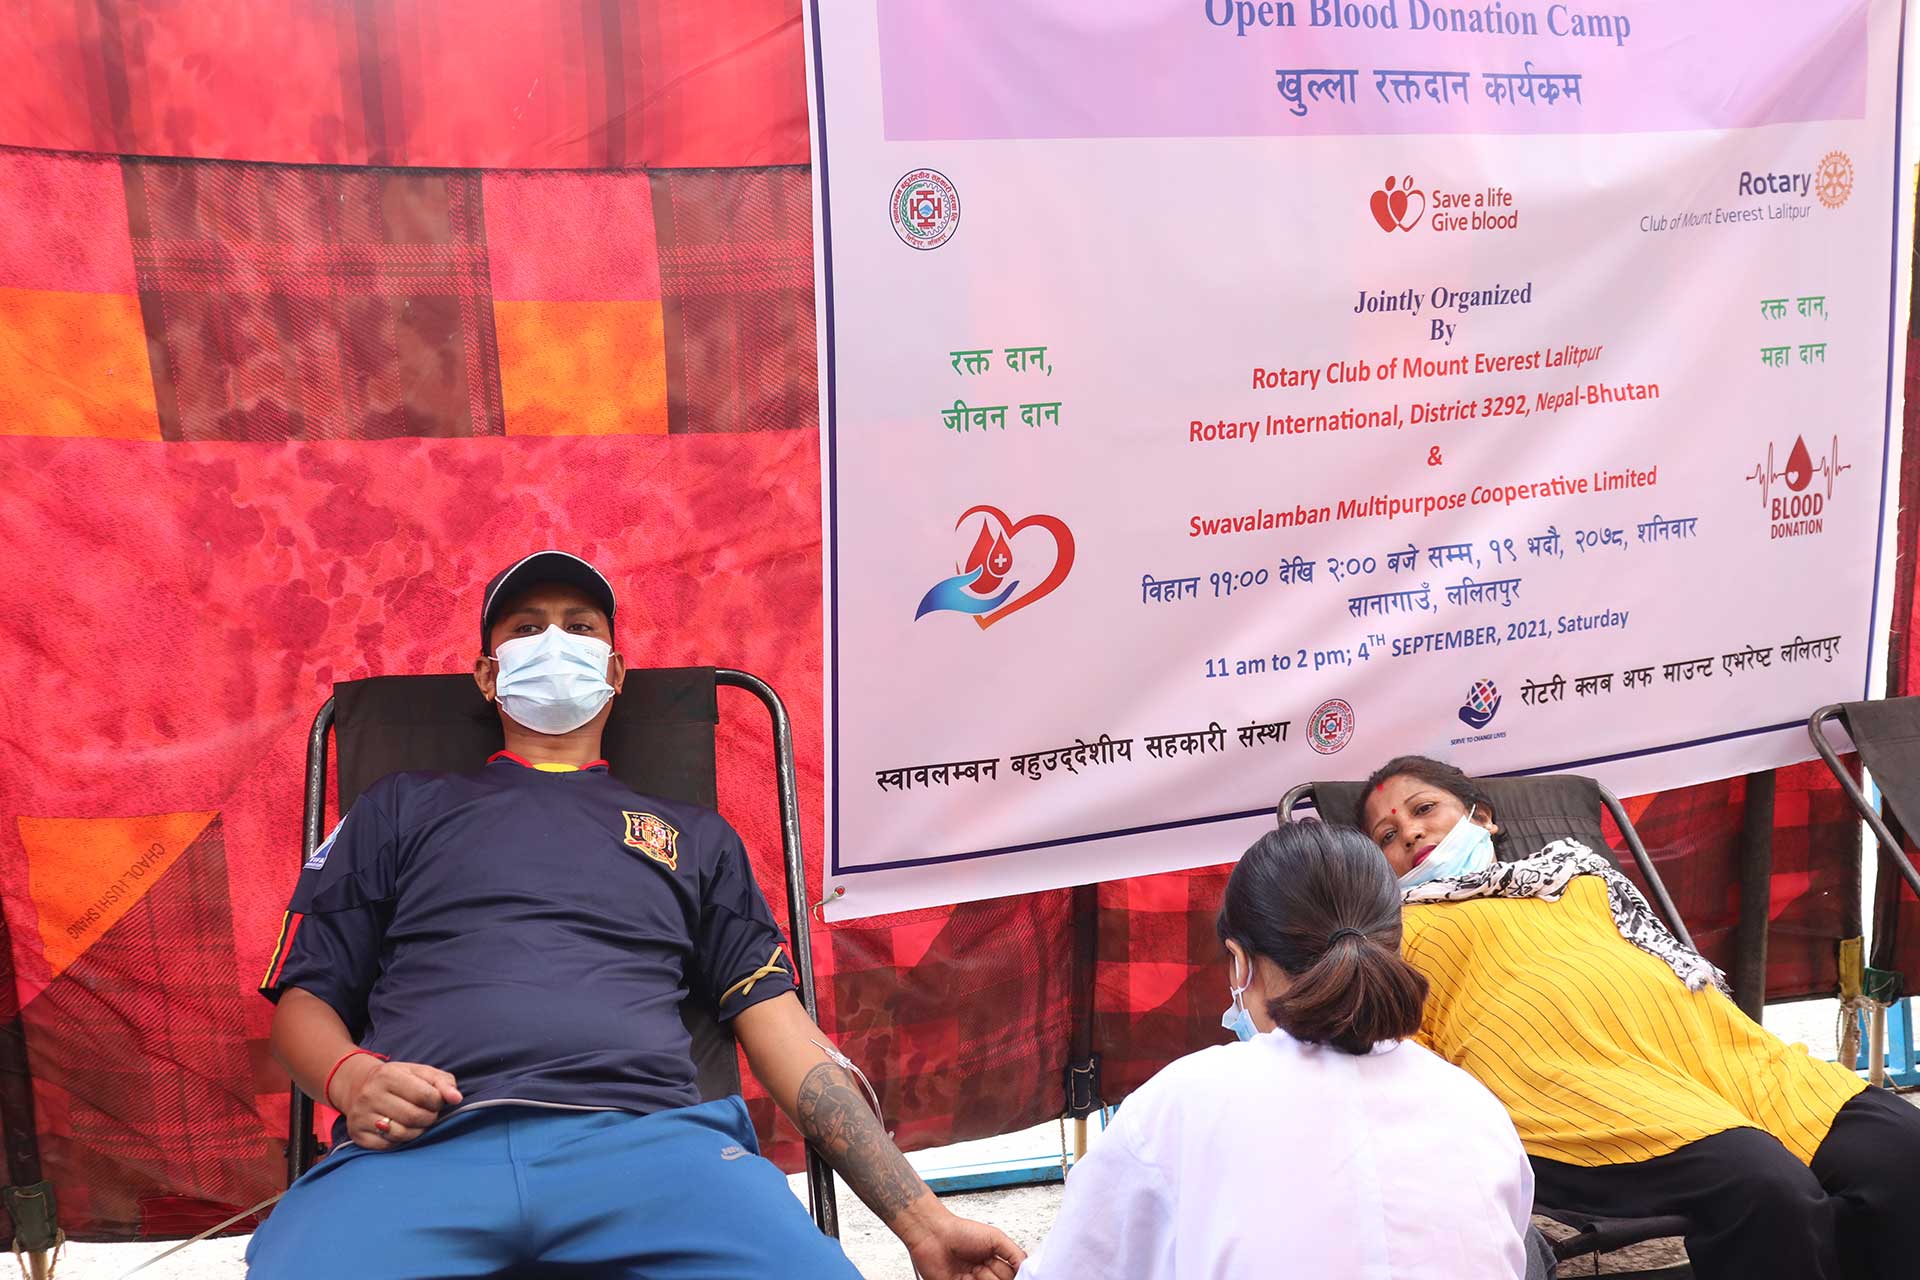 Open Blood Donation Camp